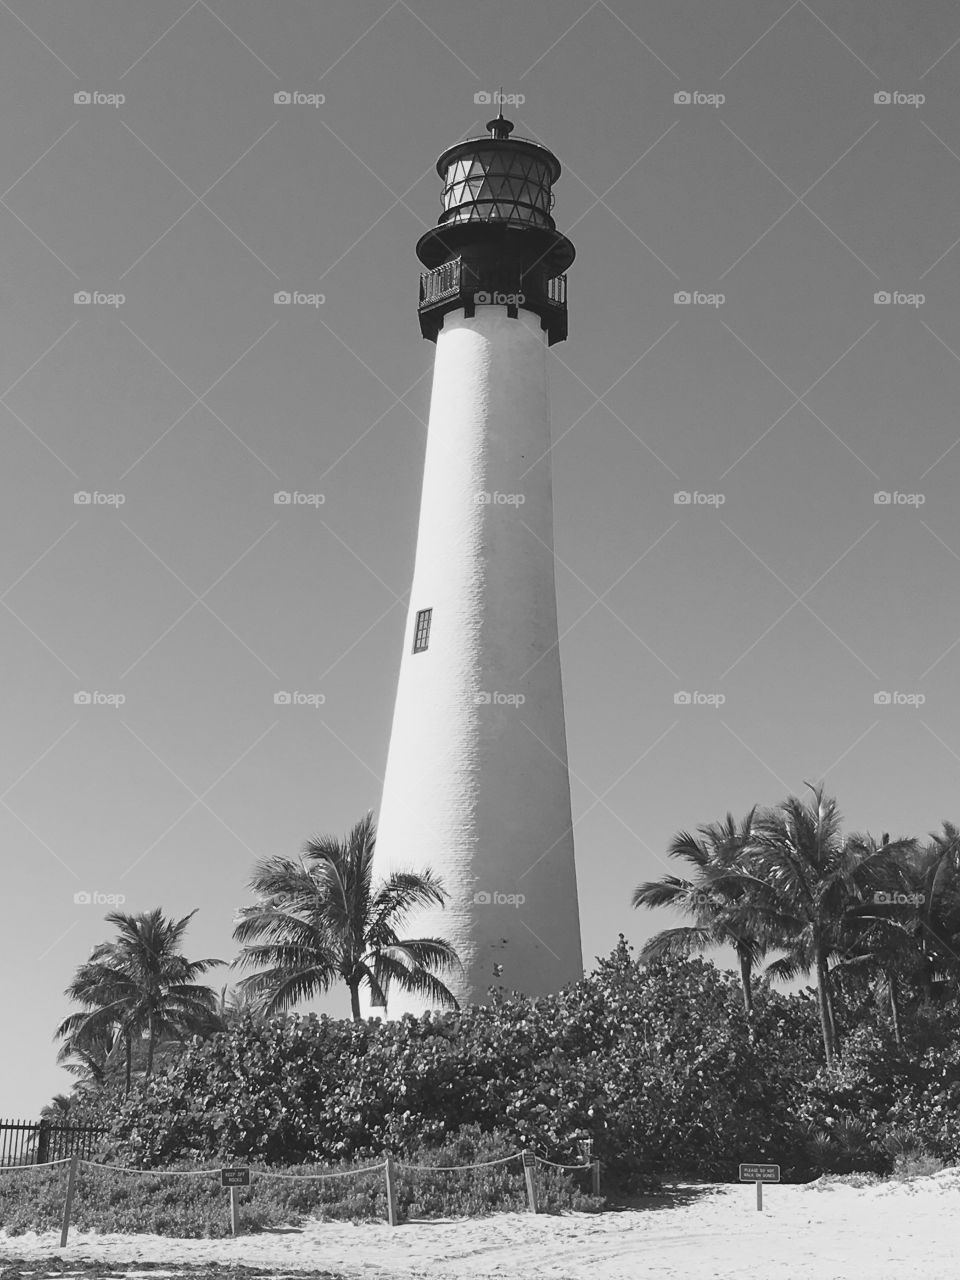 Key Biscayne lighthouse black and white.